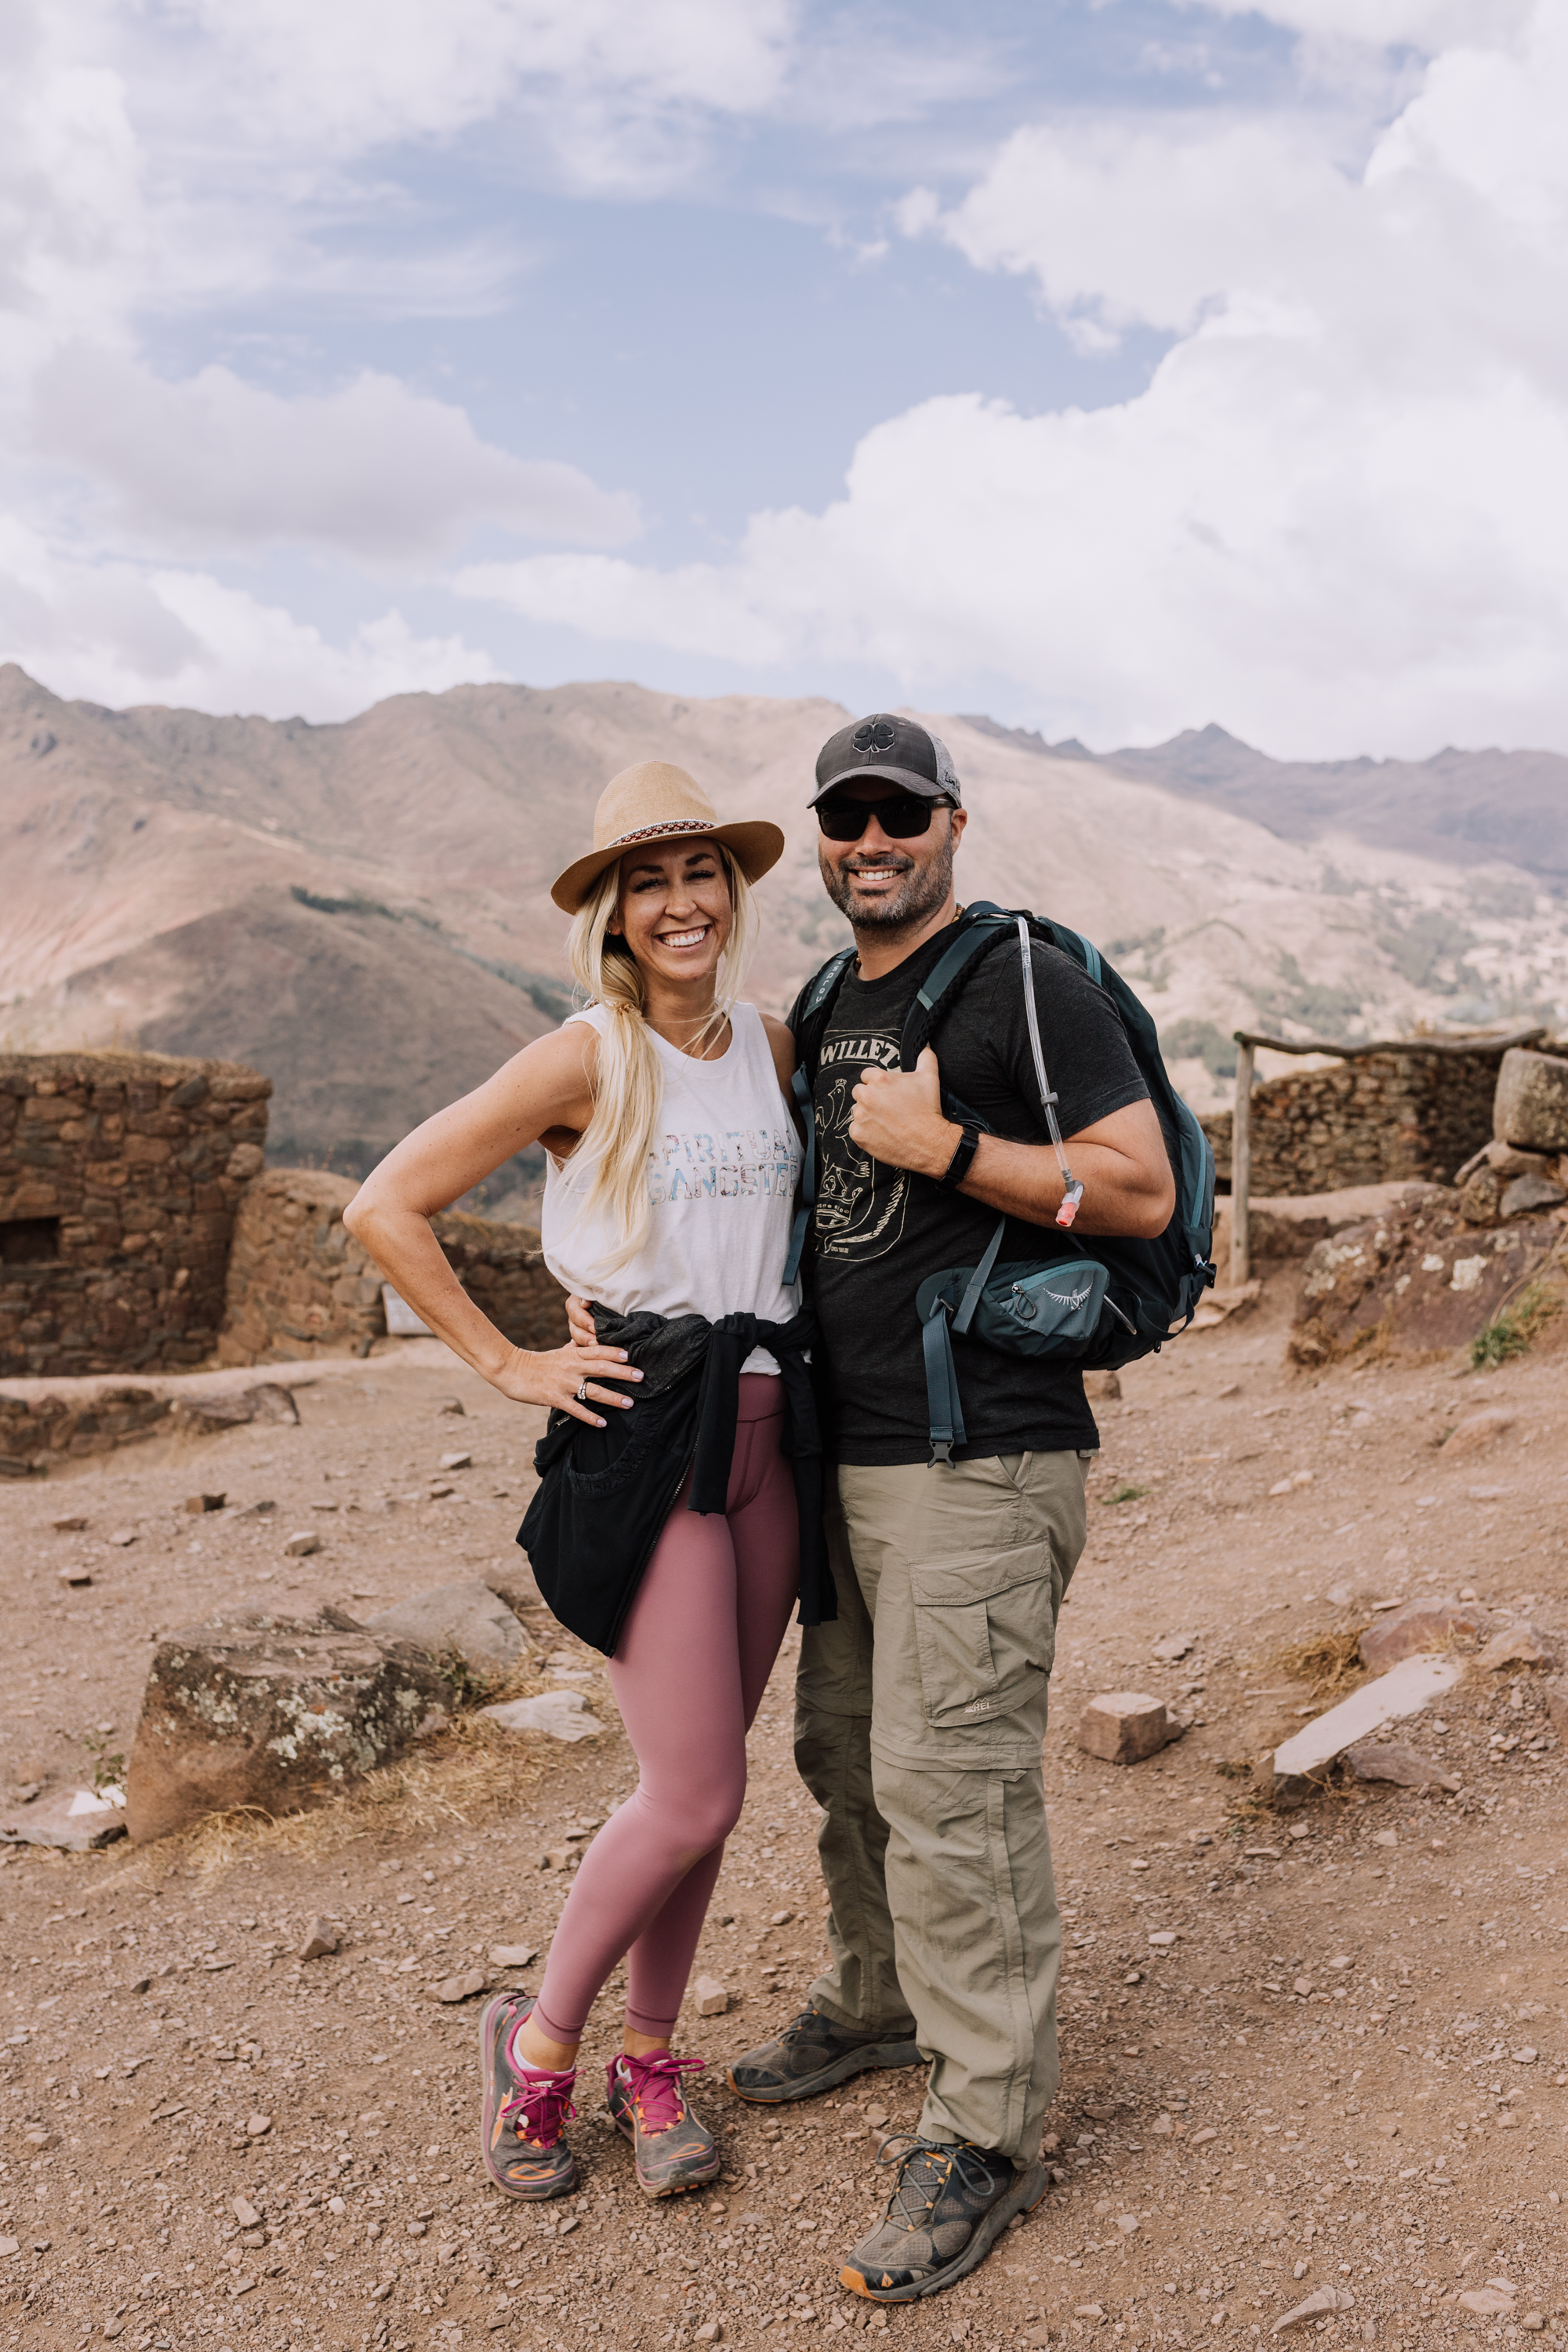 husband and wife exploring the magical sacred valley of peru. #travel #wanderlust #momanddad